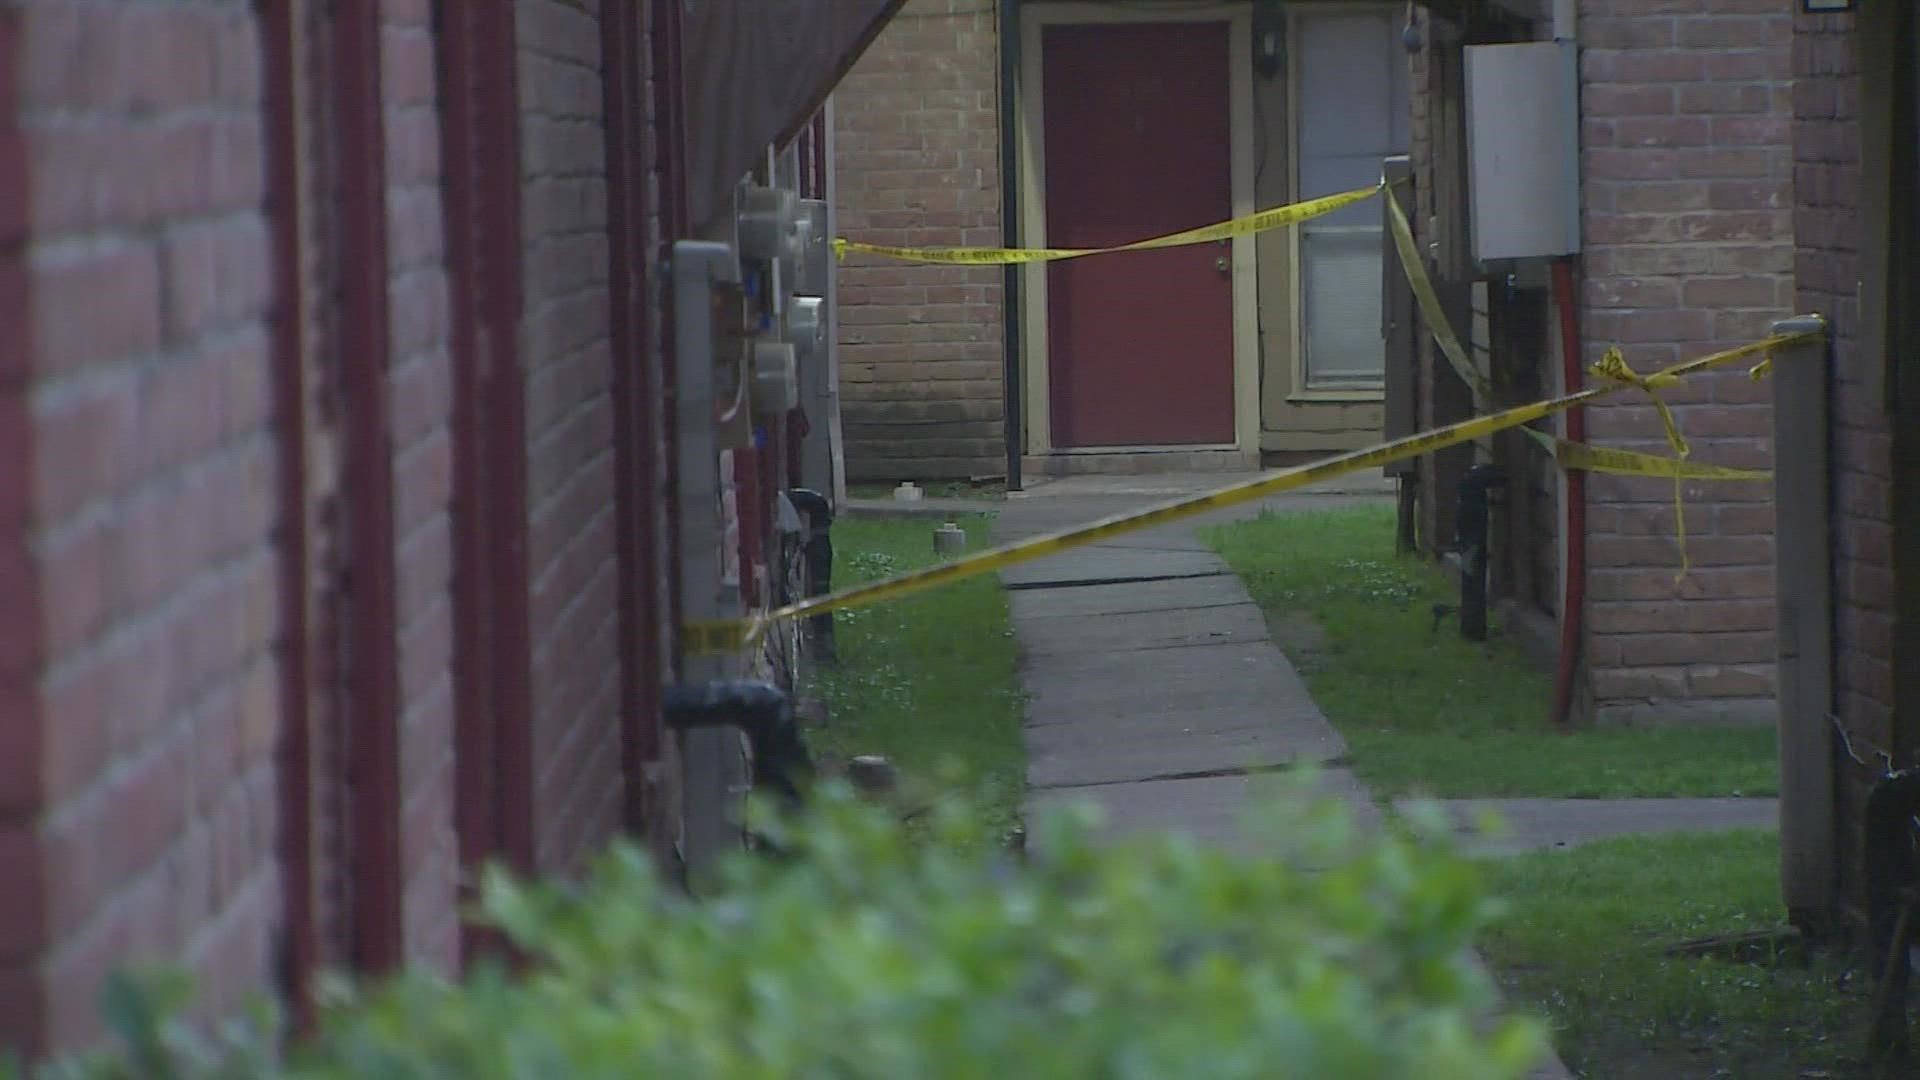 Residents at a southwest Houston apartment complex said they noticed a strong odor coming from a moving box. When police arrived, they made a gruesome discovery.